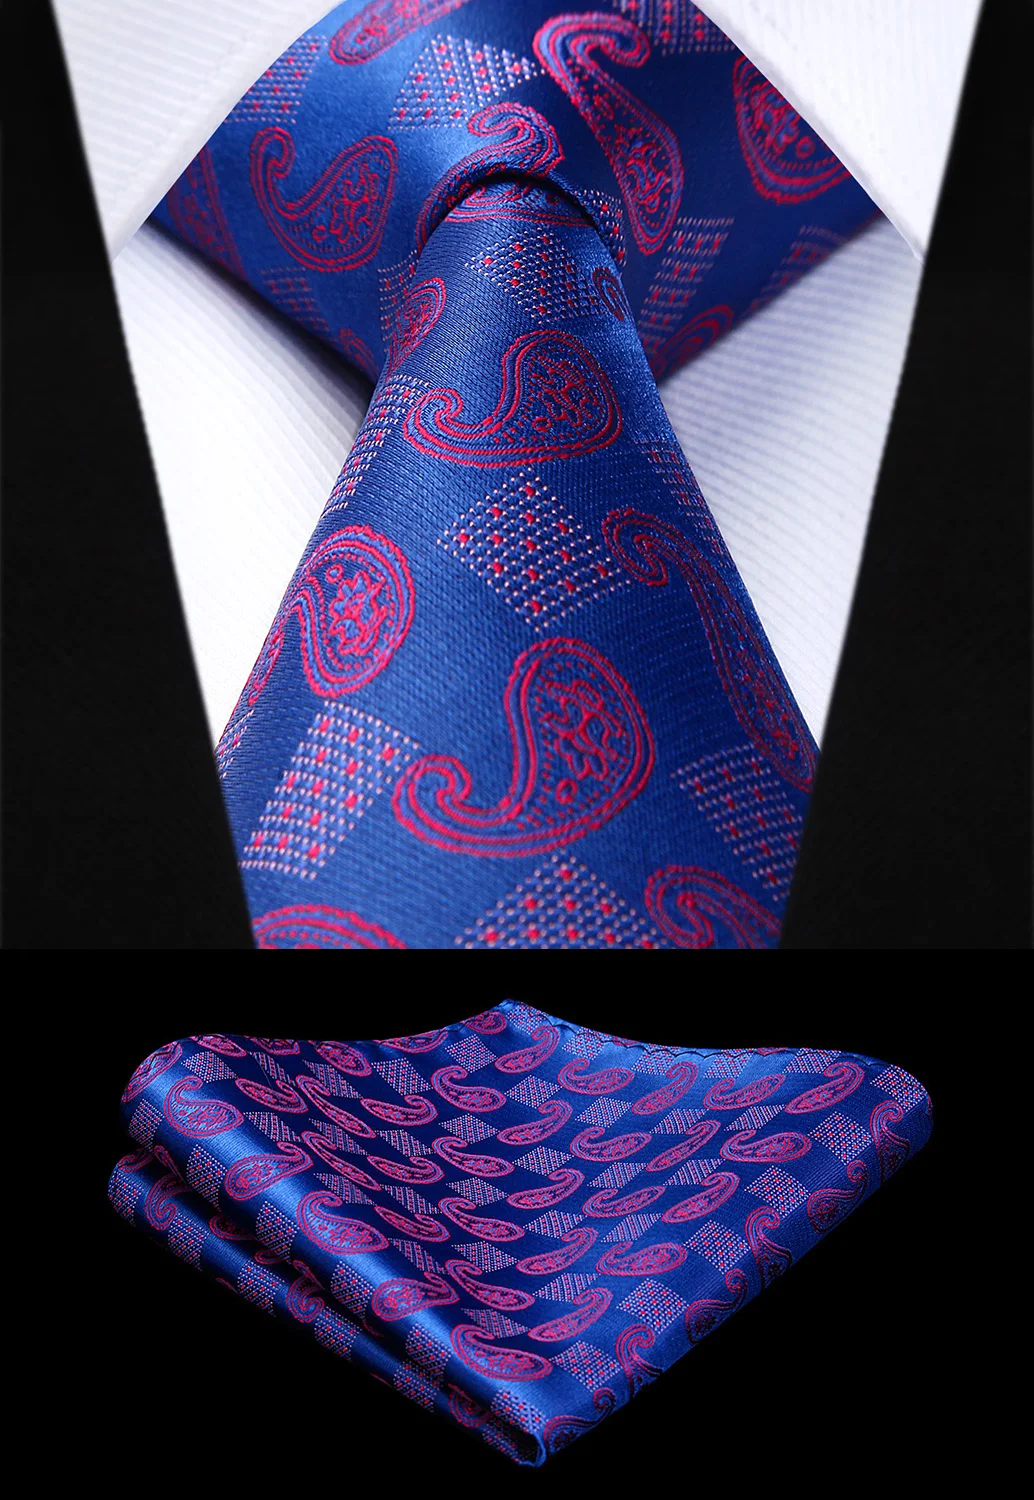  Party Wedding Classic Fashion Pocket Square Tie New Paisley Floral Blue Red Mens Tie Woven Silk Nec